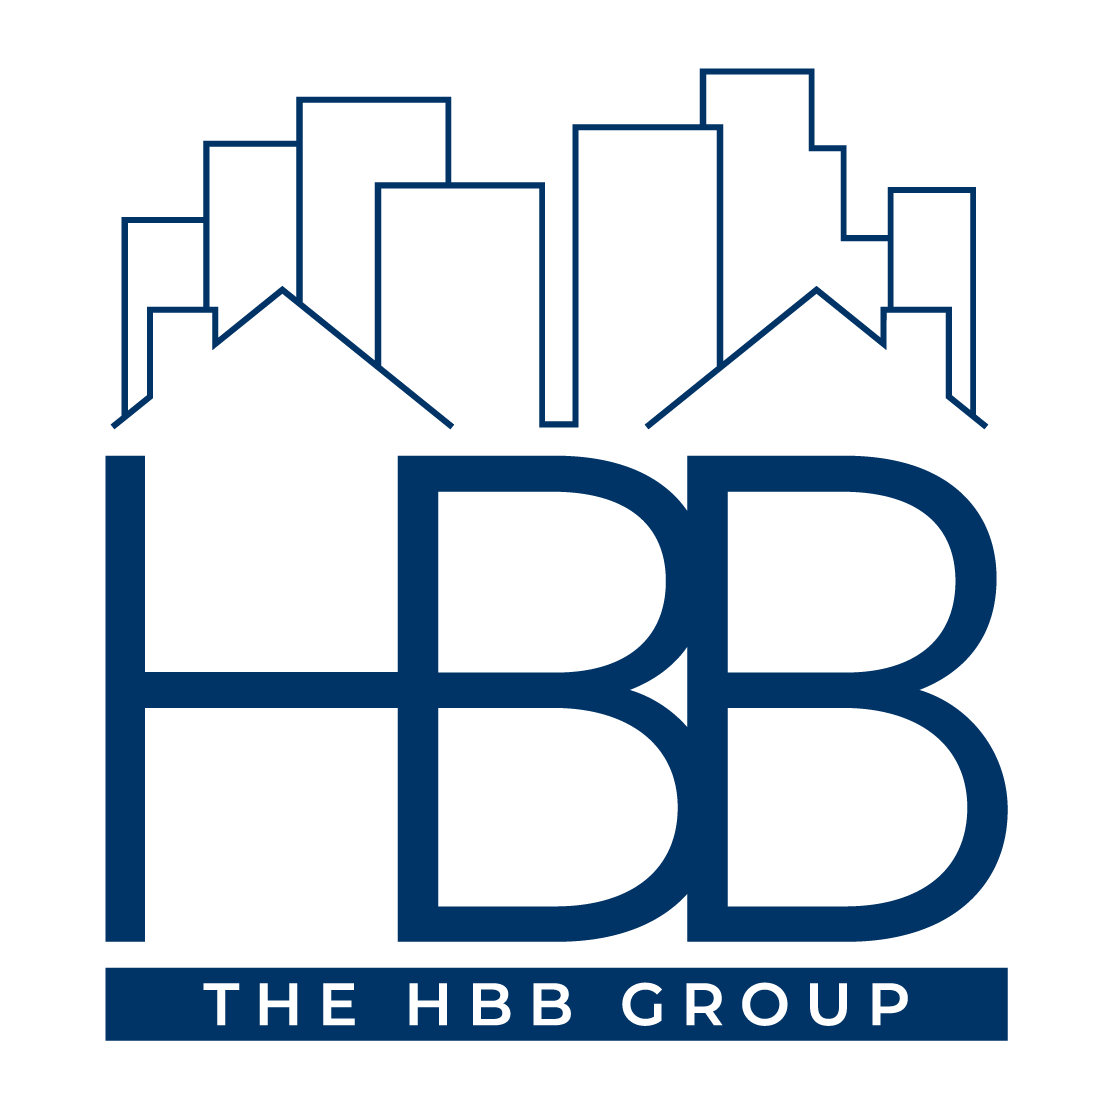 The HBB Group